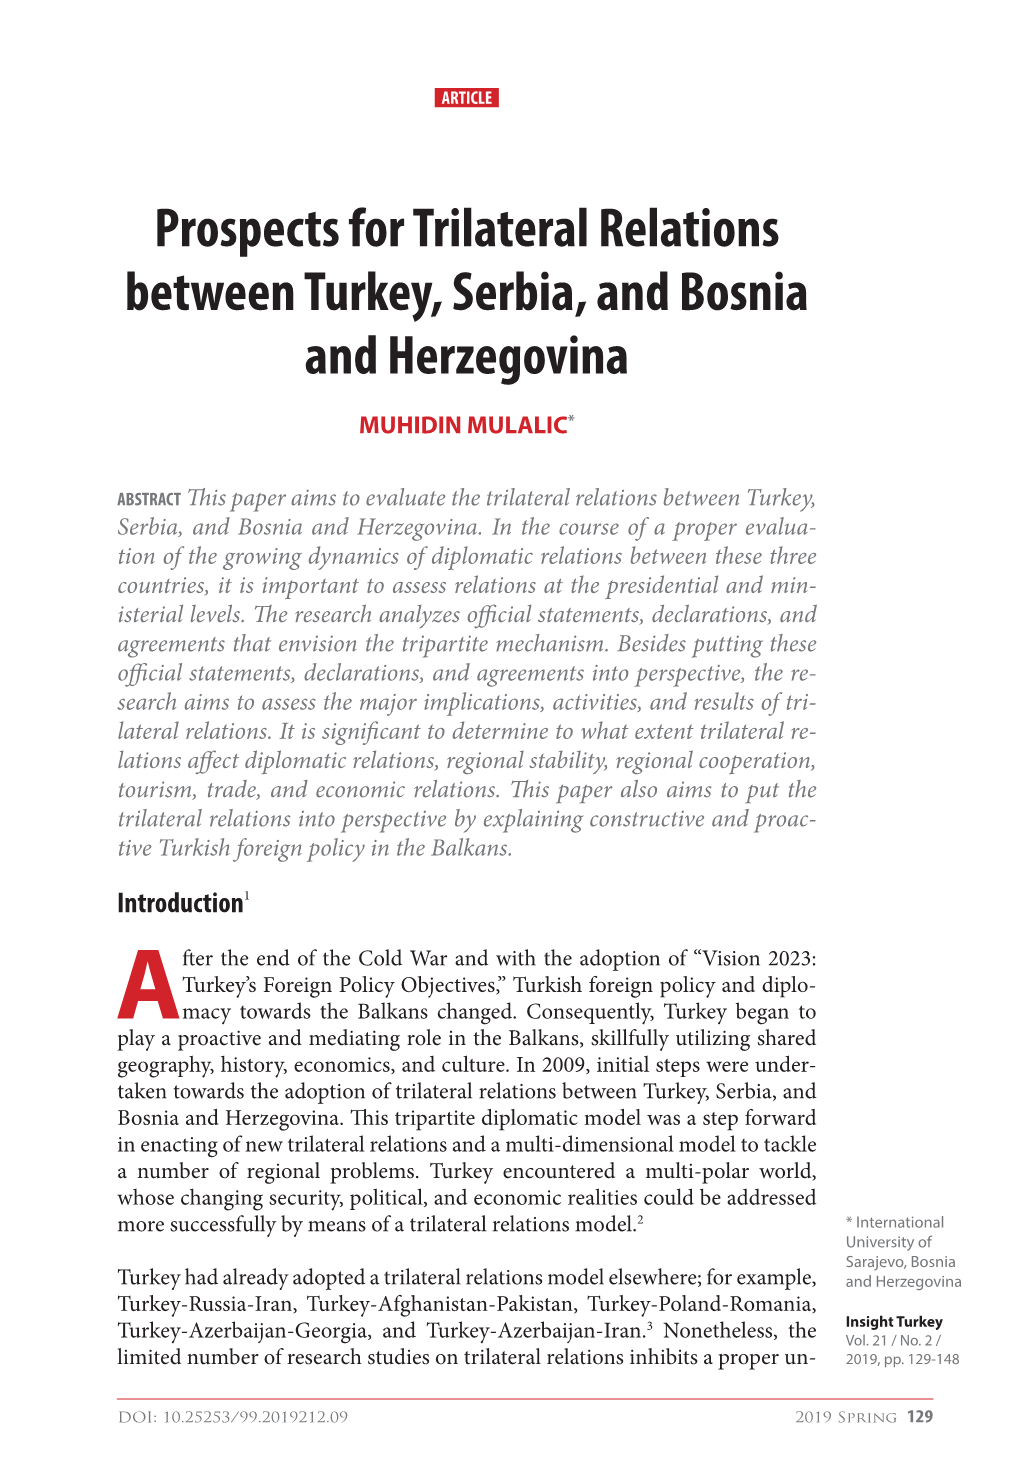 Prospects for Trilateral Relations Between Turkey, Serbia, and Bosnia and Herzegovina